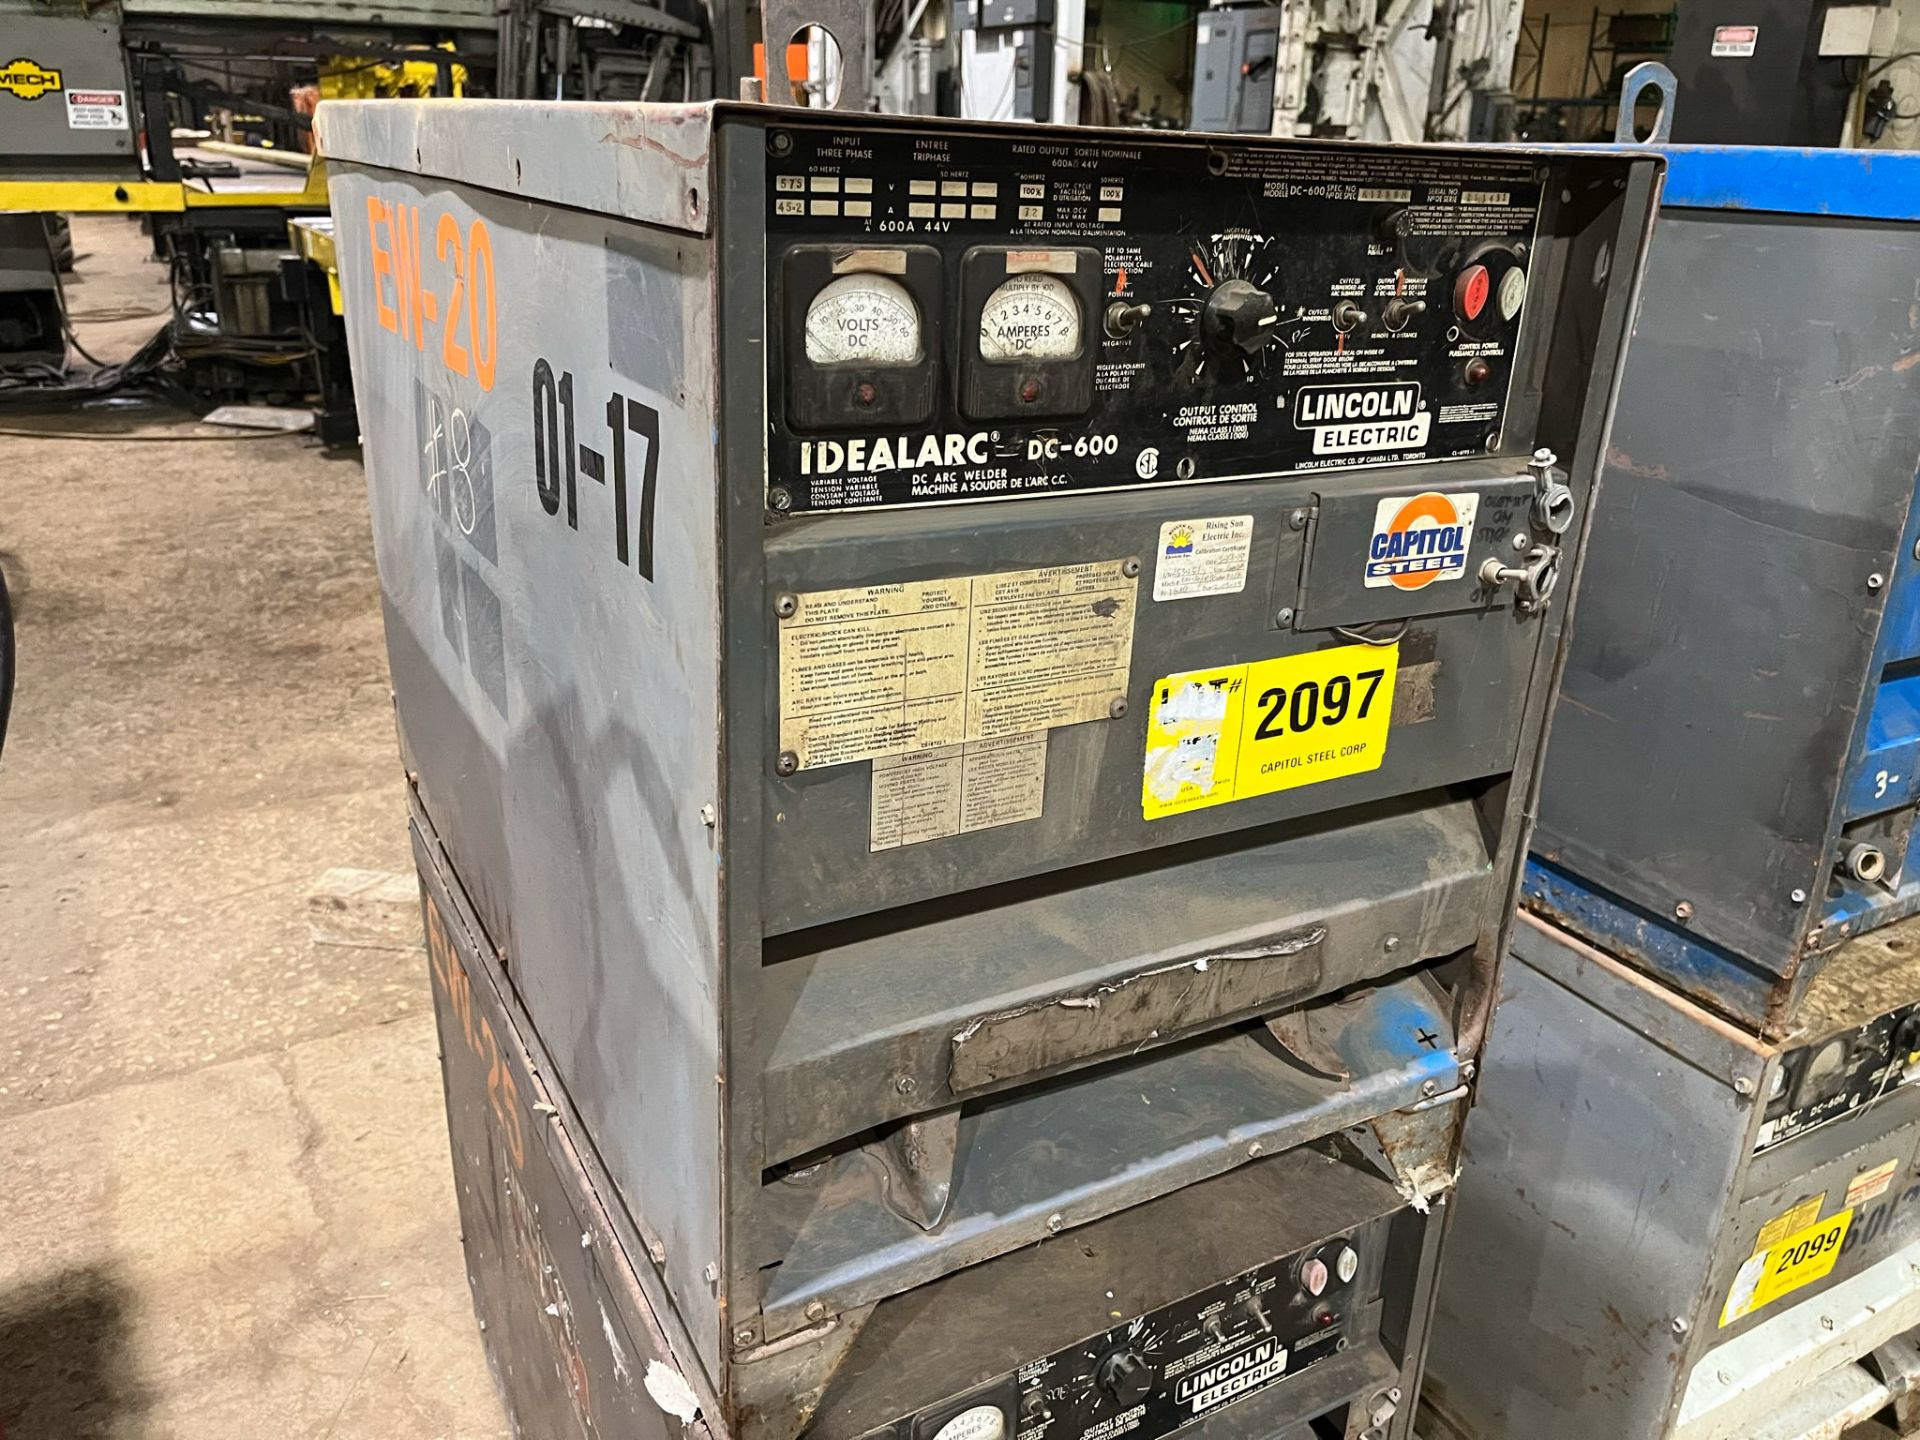 LINCOLN ELECTRIC IDEALARC DC-600 MULTI-PROCESS WELDING POWER SOURCE [RIGGING FEES FOR LOT #2097 - $